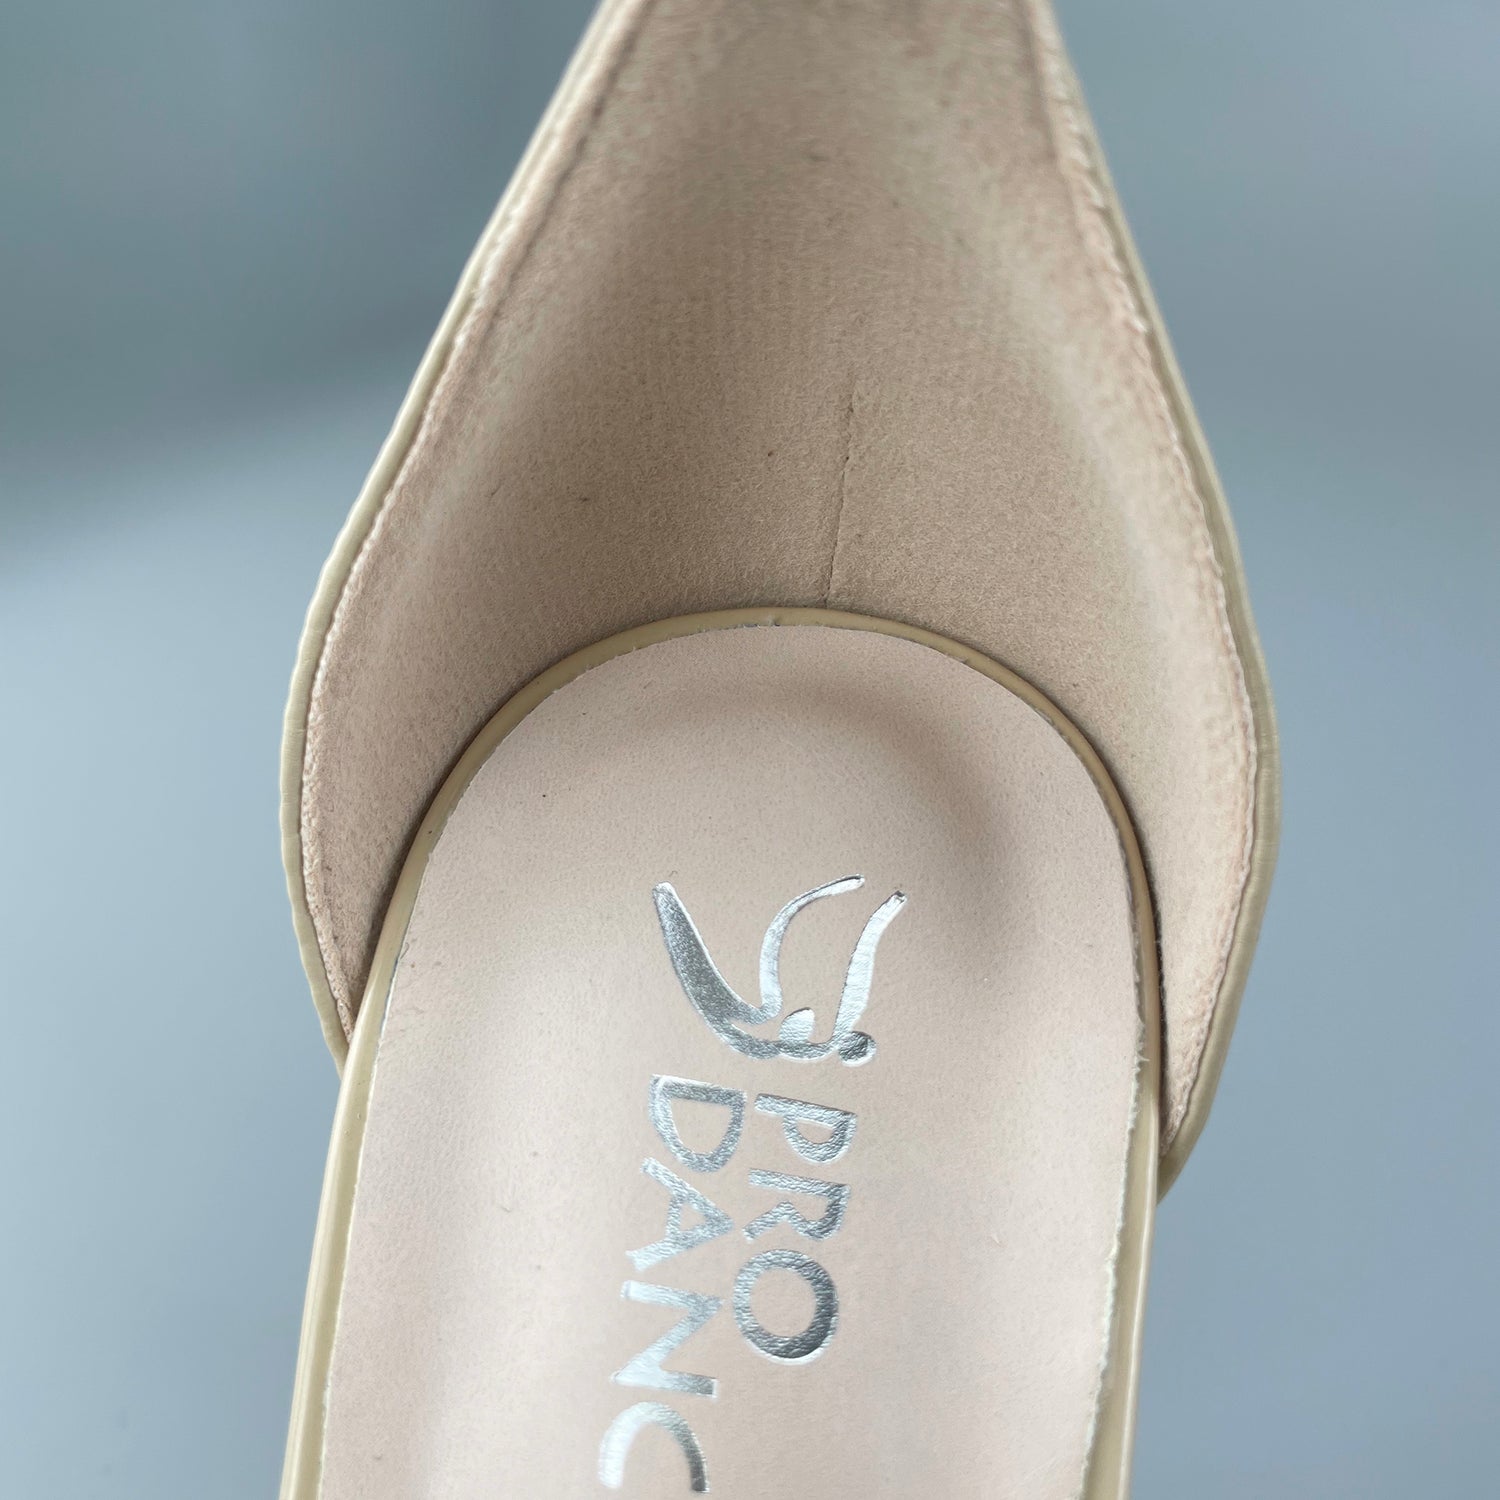 Pro Dancer Peep-toe Tango Shoes with Closed-back High Heels and Hard Leather Sole in Nude color for Argentine Tango (PD-9047A)5